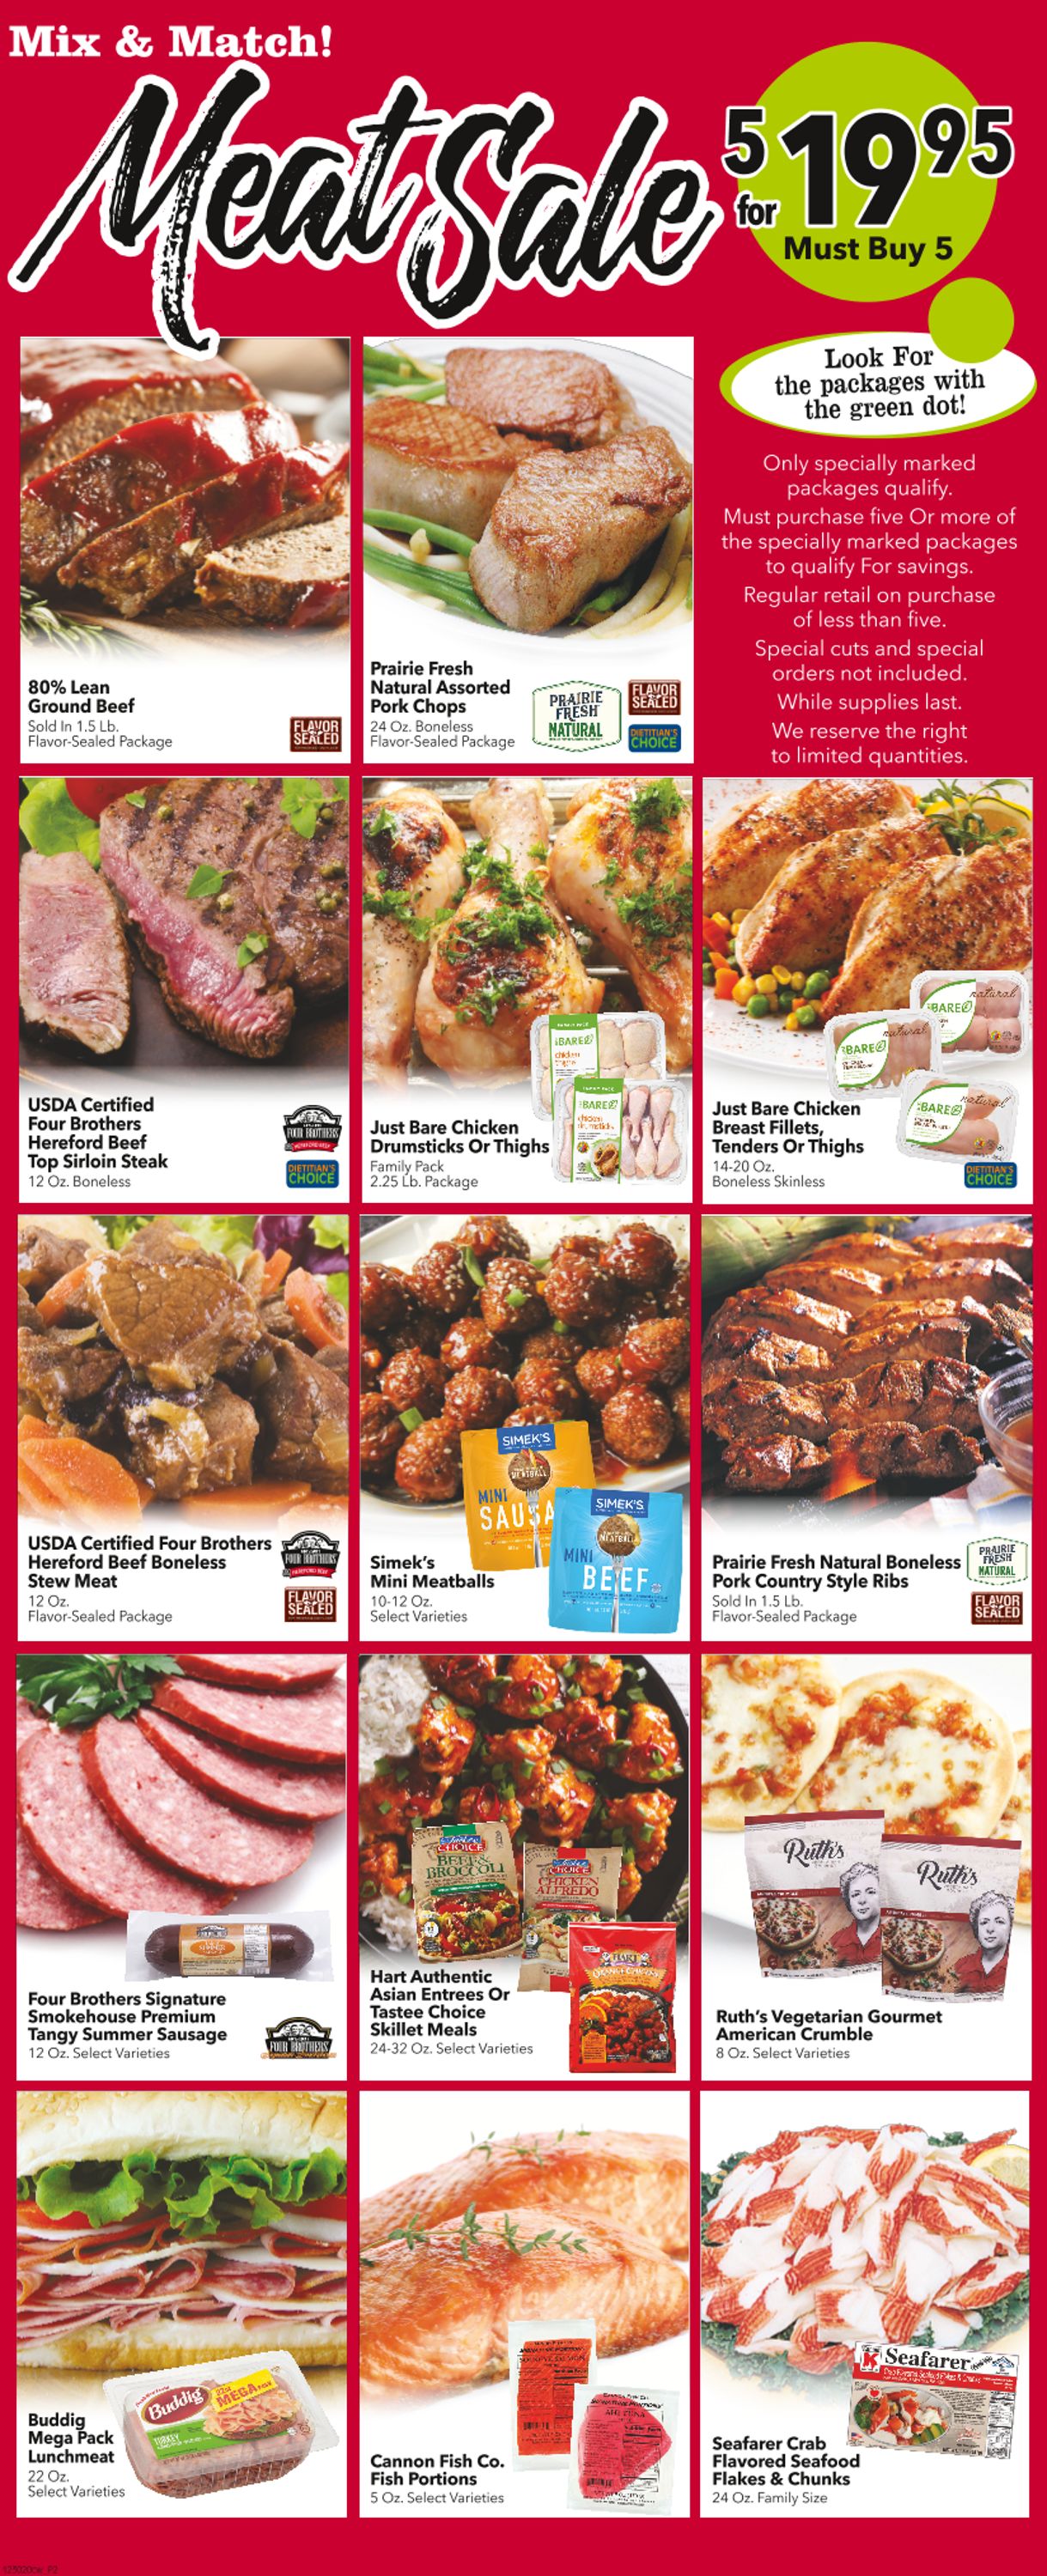 Cash Wise Weekly Ad Circular - valid 12/30-01/05/2021 (Page 2)